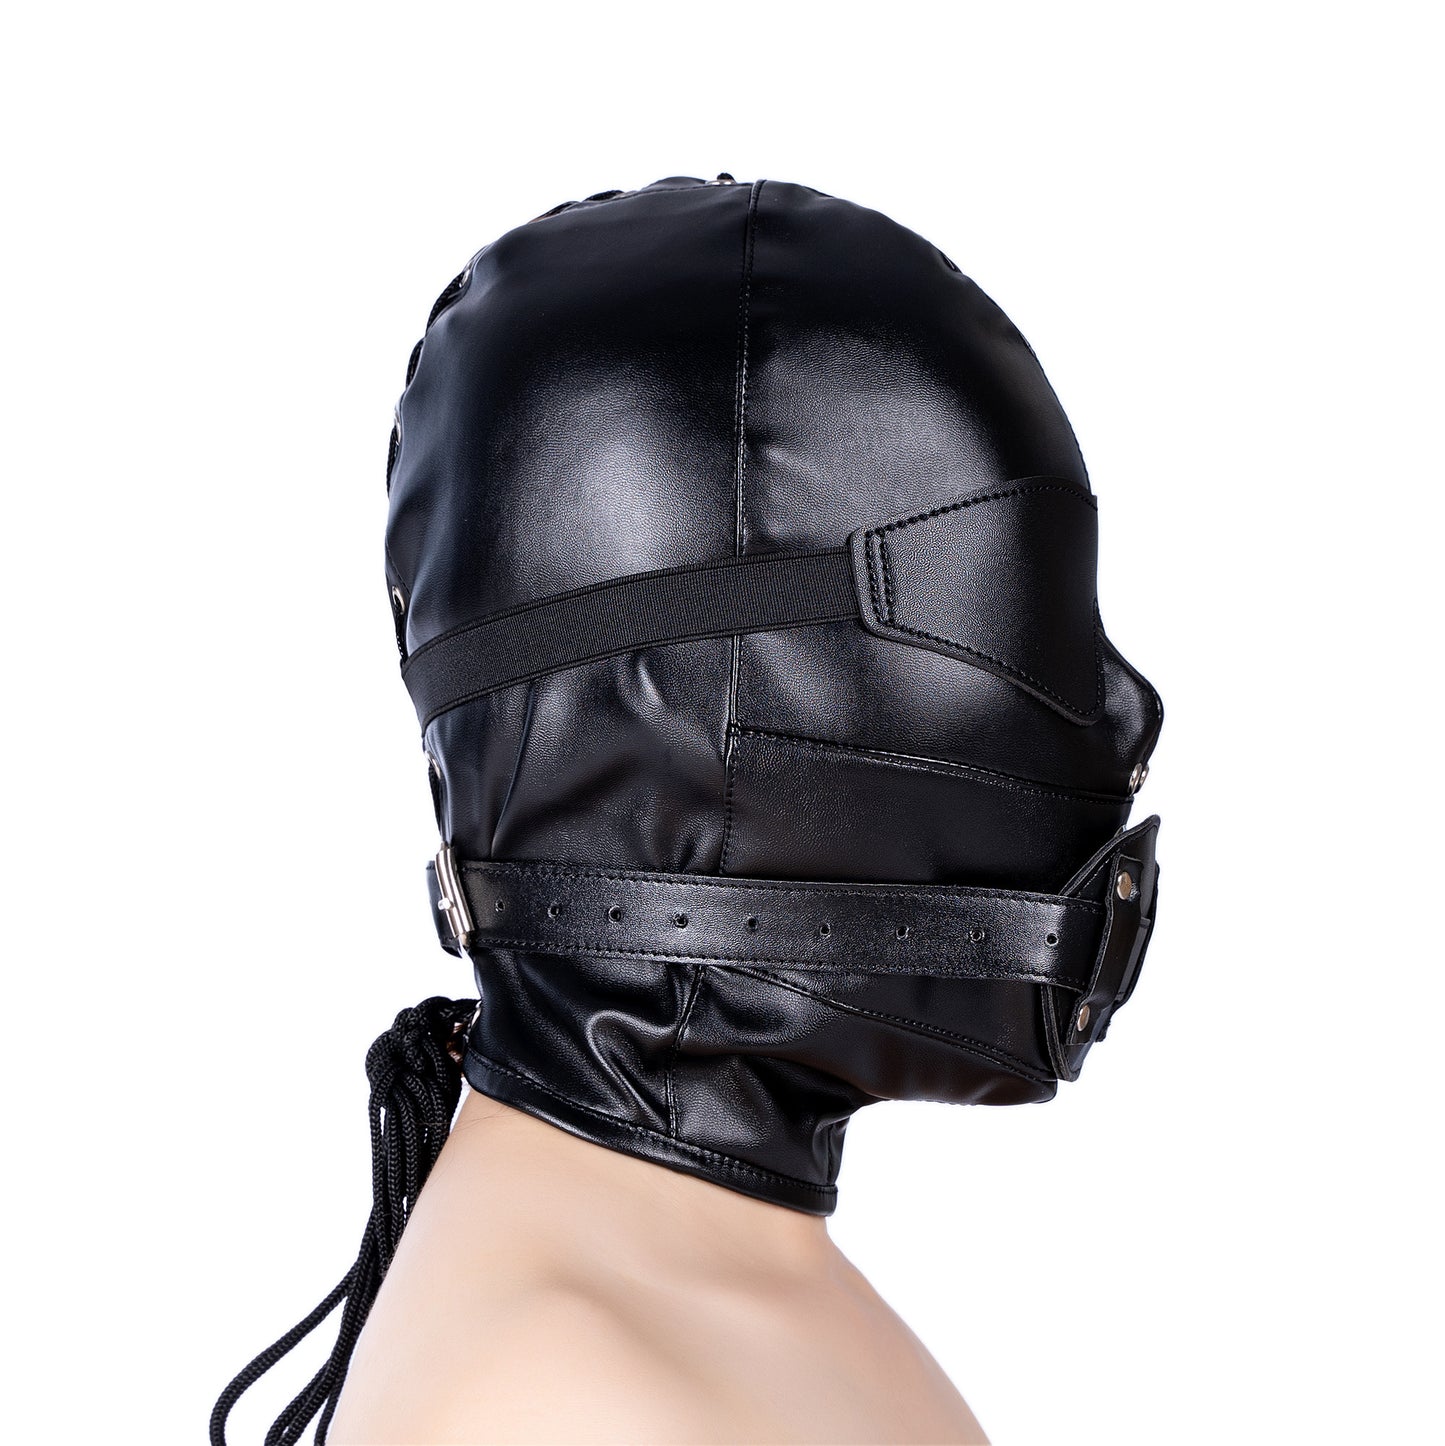 Total Lockdown Hood with Removable Blindfold and Gag